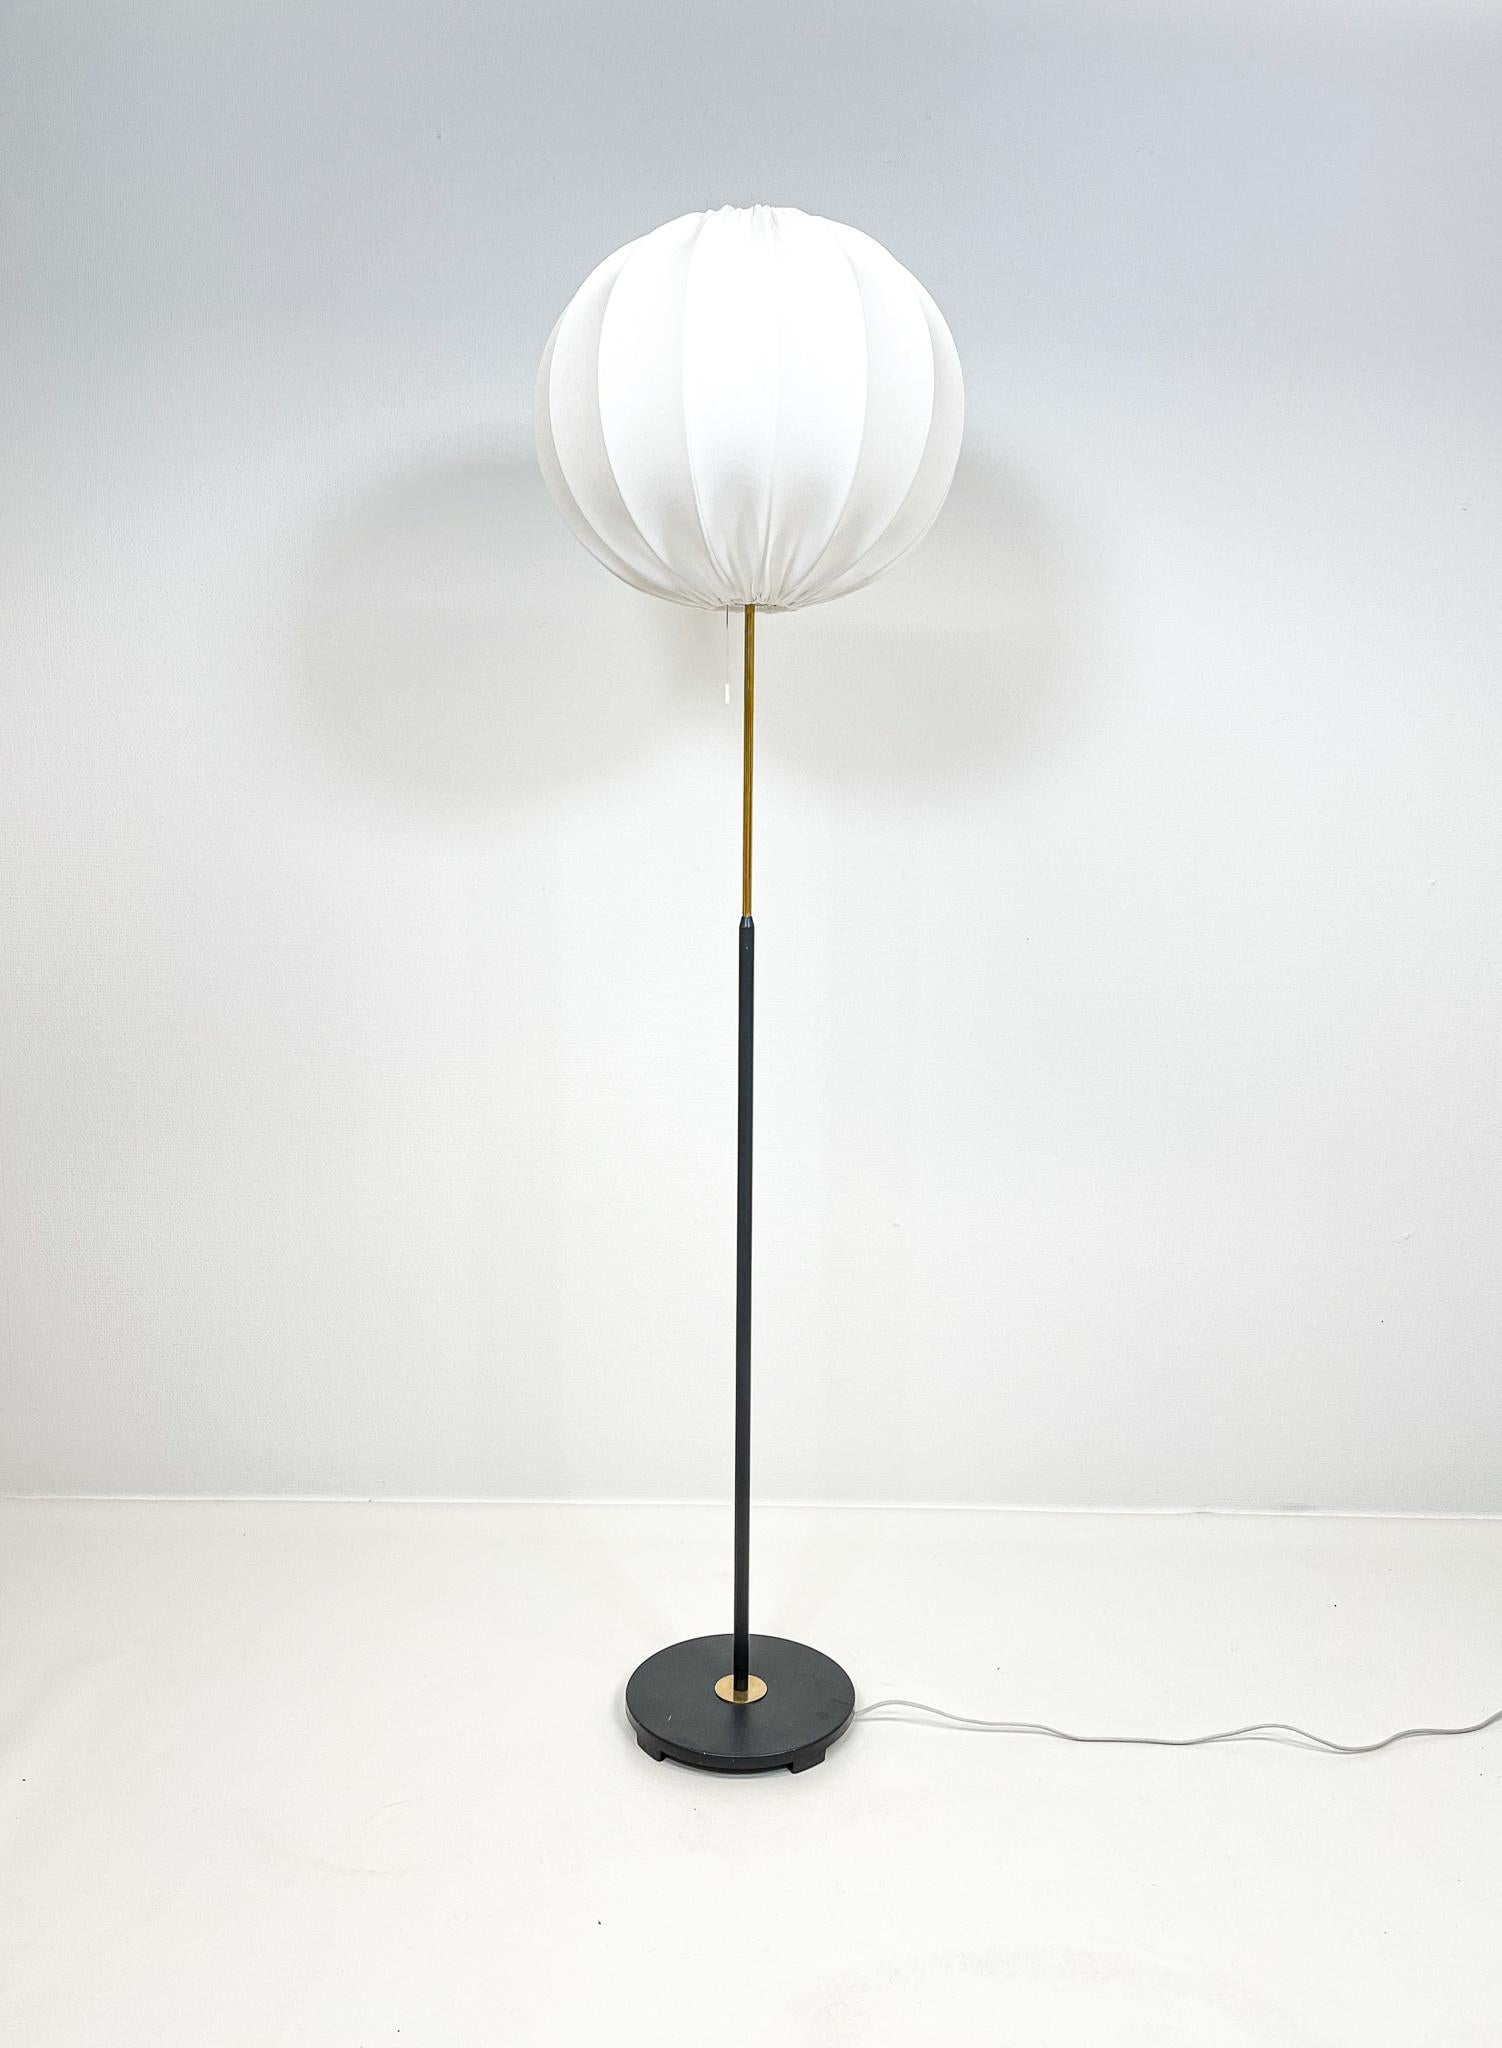 A gorgeous floor lamp made in brass, base in metall and black hardened plastic. Produced for ASEA this wonderful lamp was most likely designed by Hans Bergström.

Good working condition. The shade cloud sahde made in cotton is not original it’s a